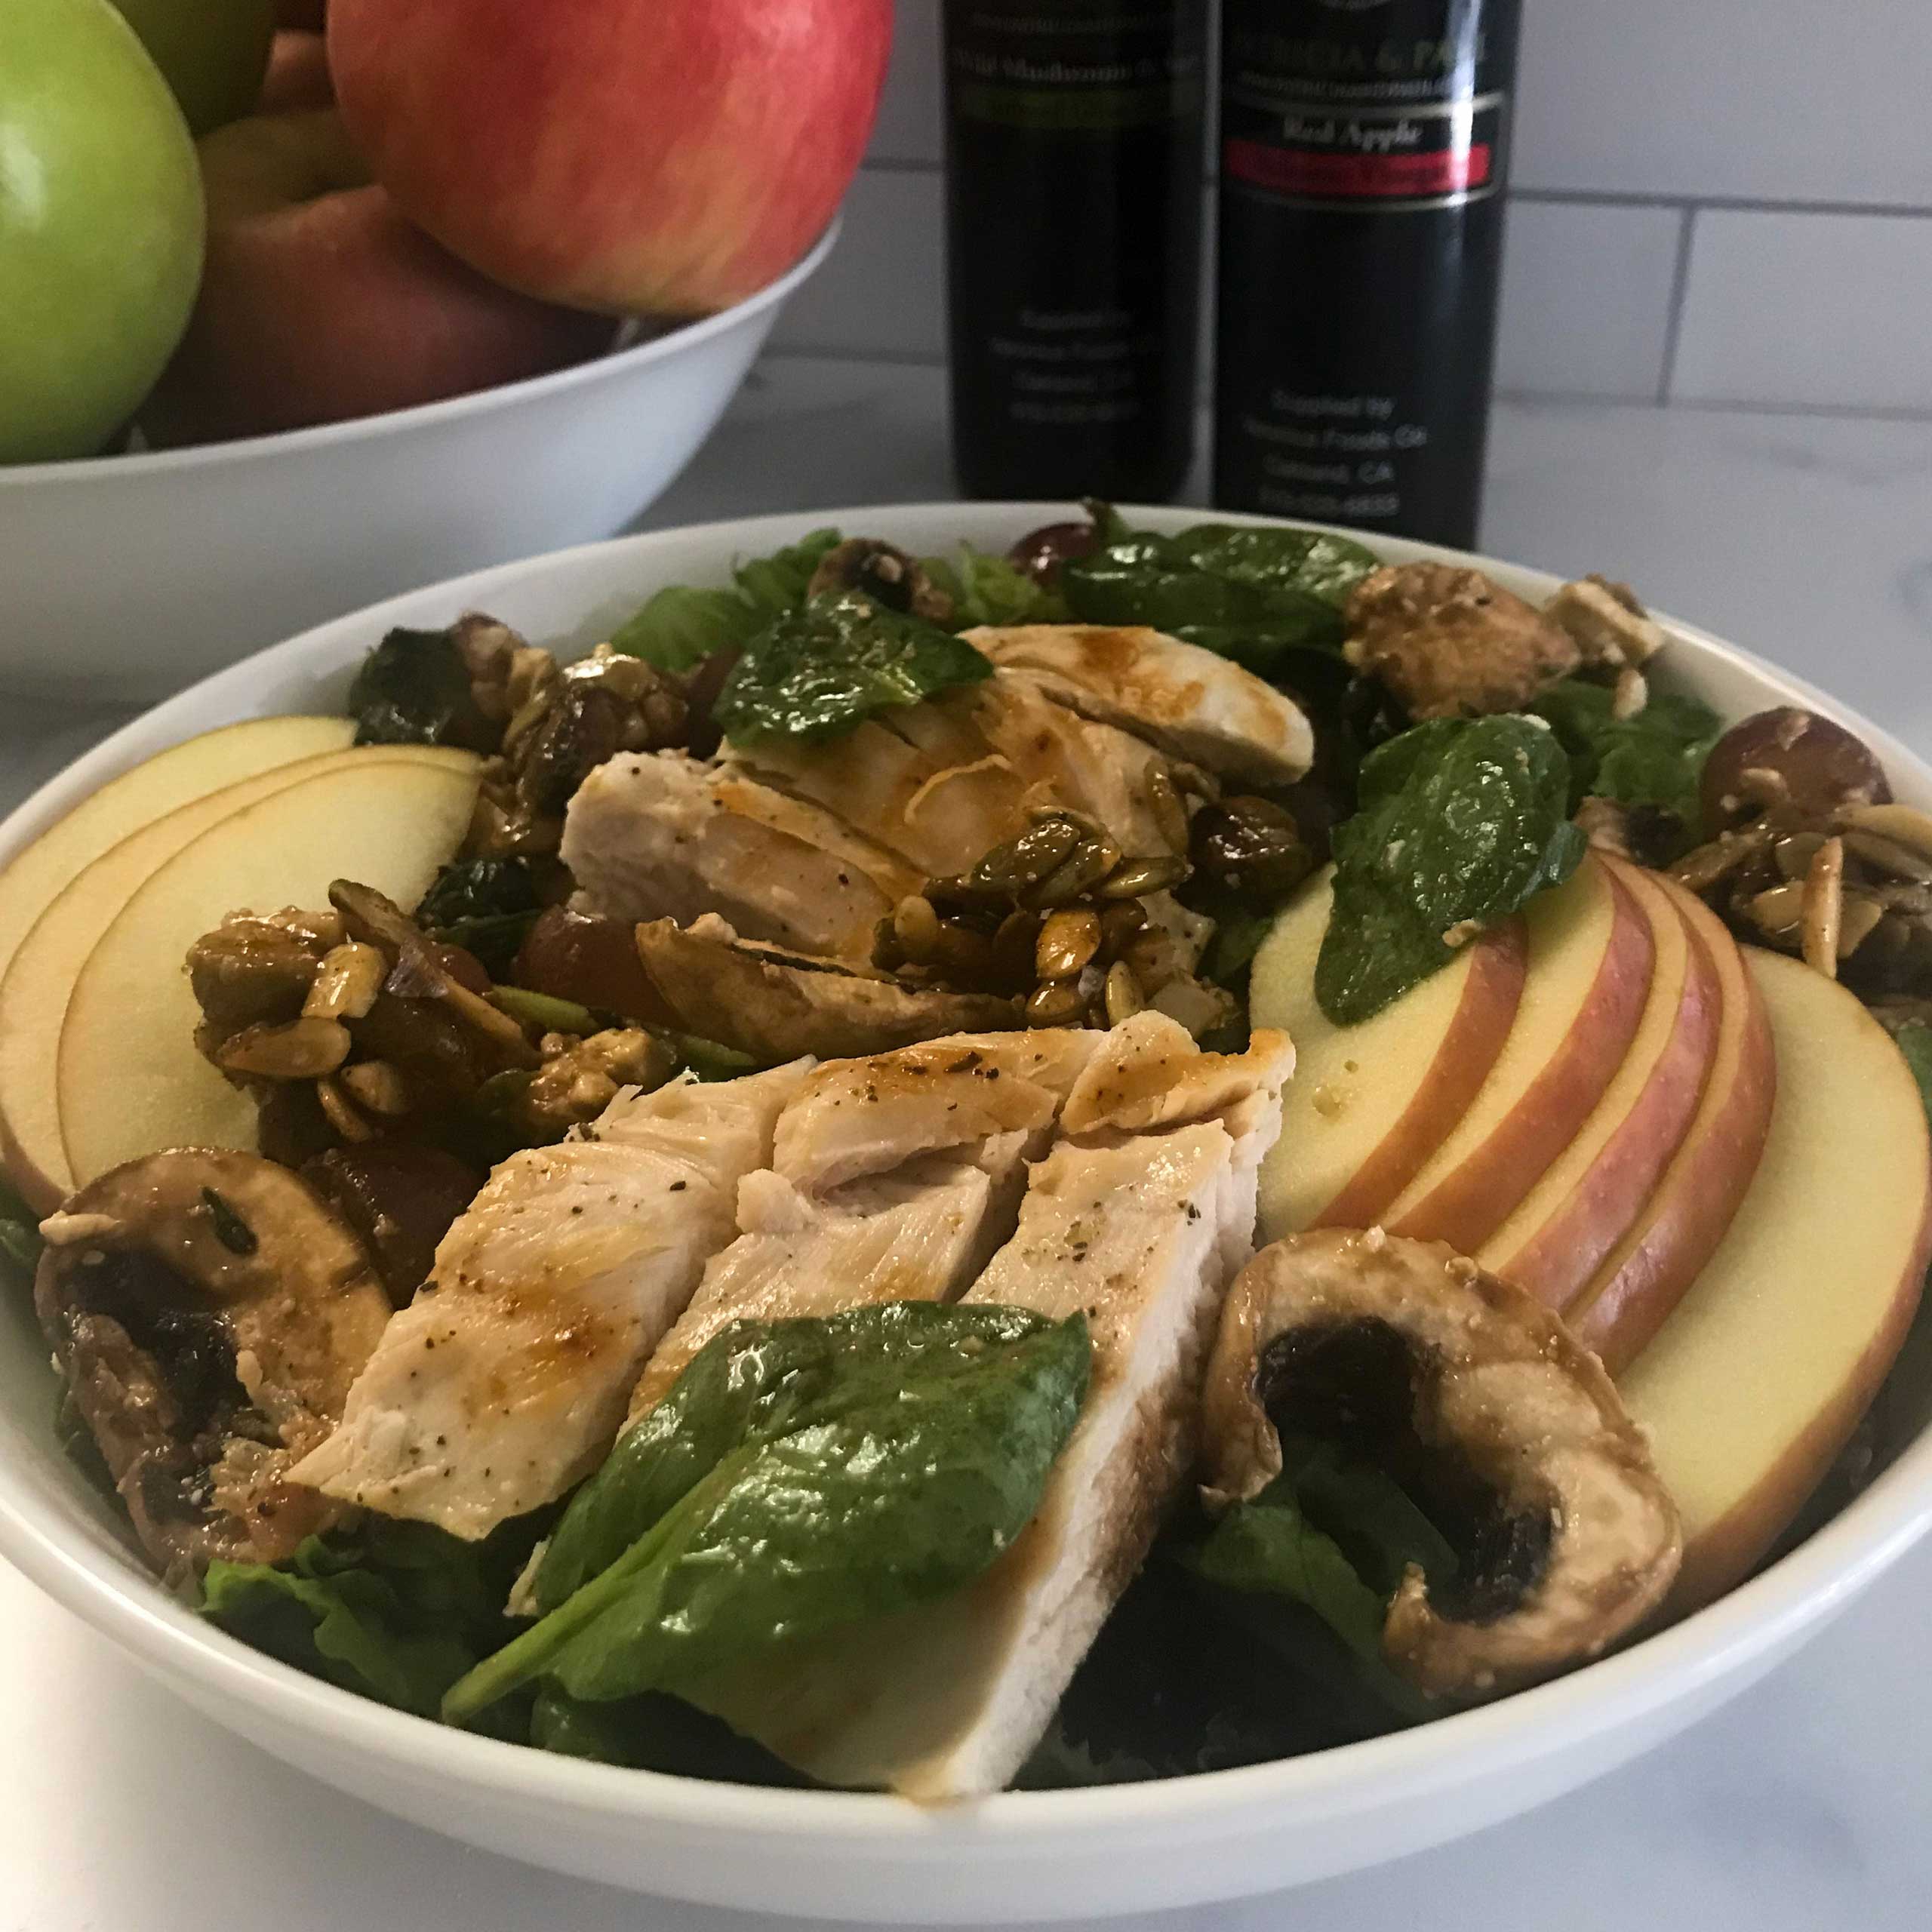 Red-Apple-and-Chicken-Salad-with-Nut-Clusters-14